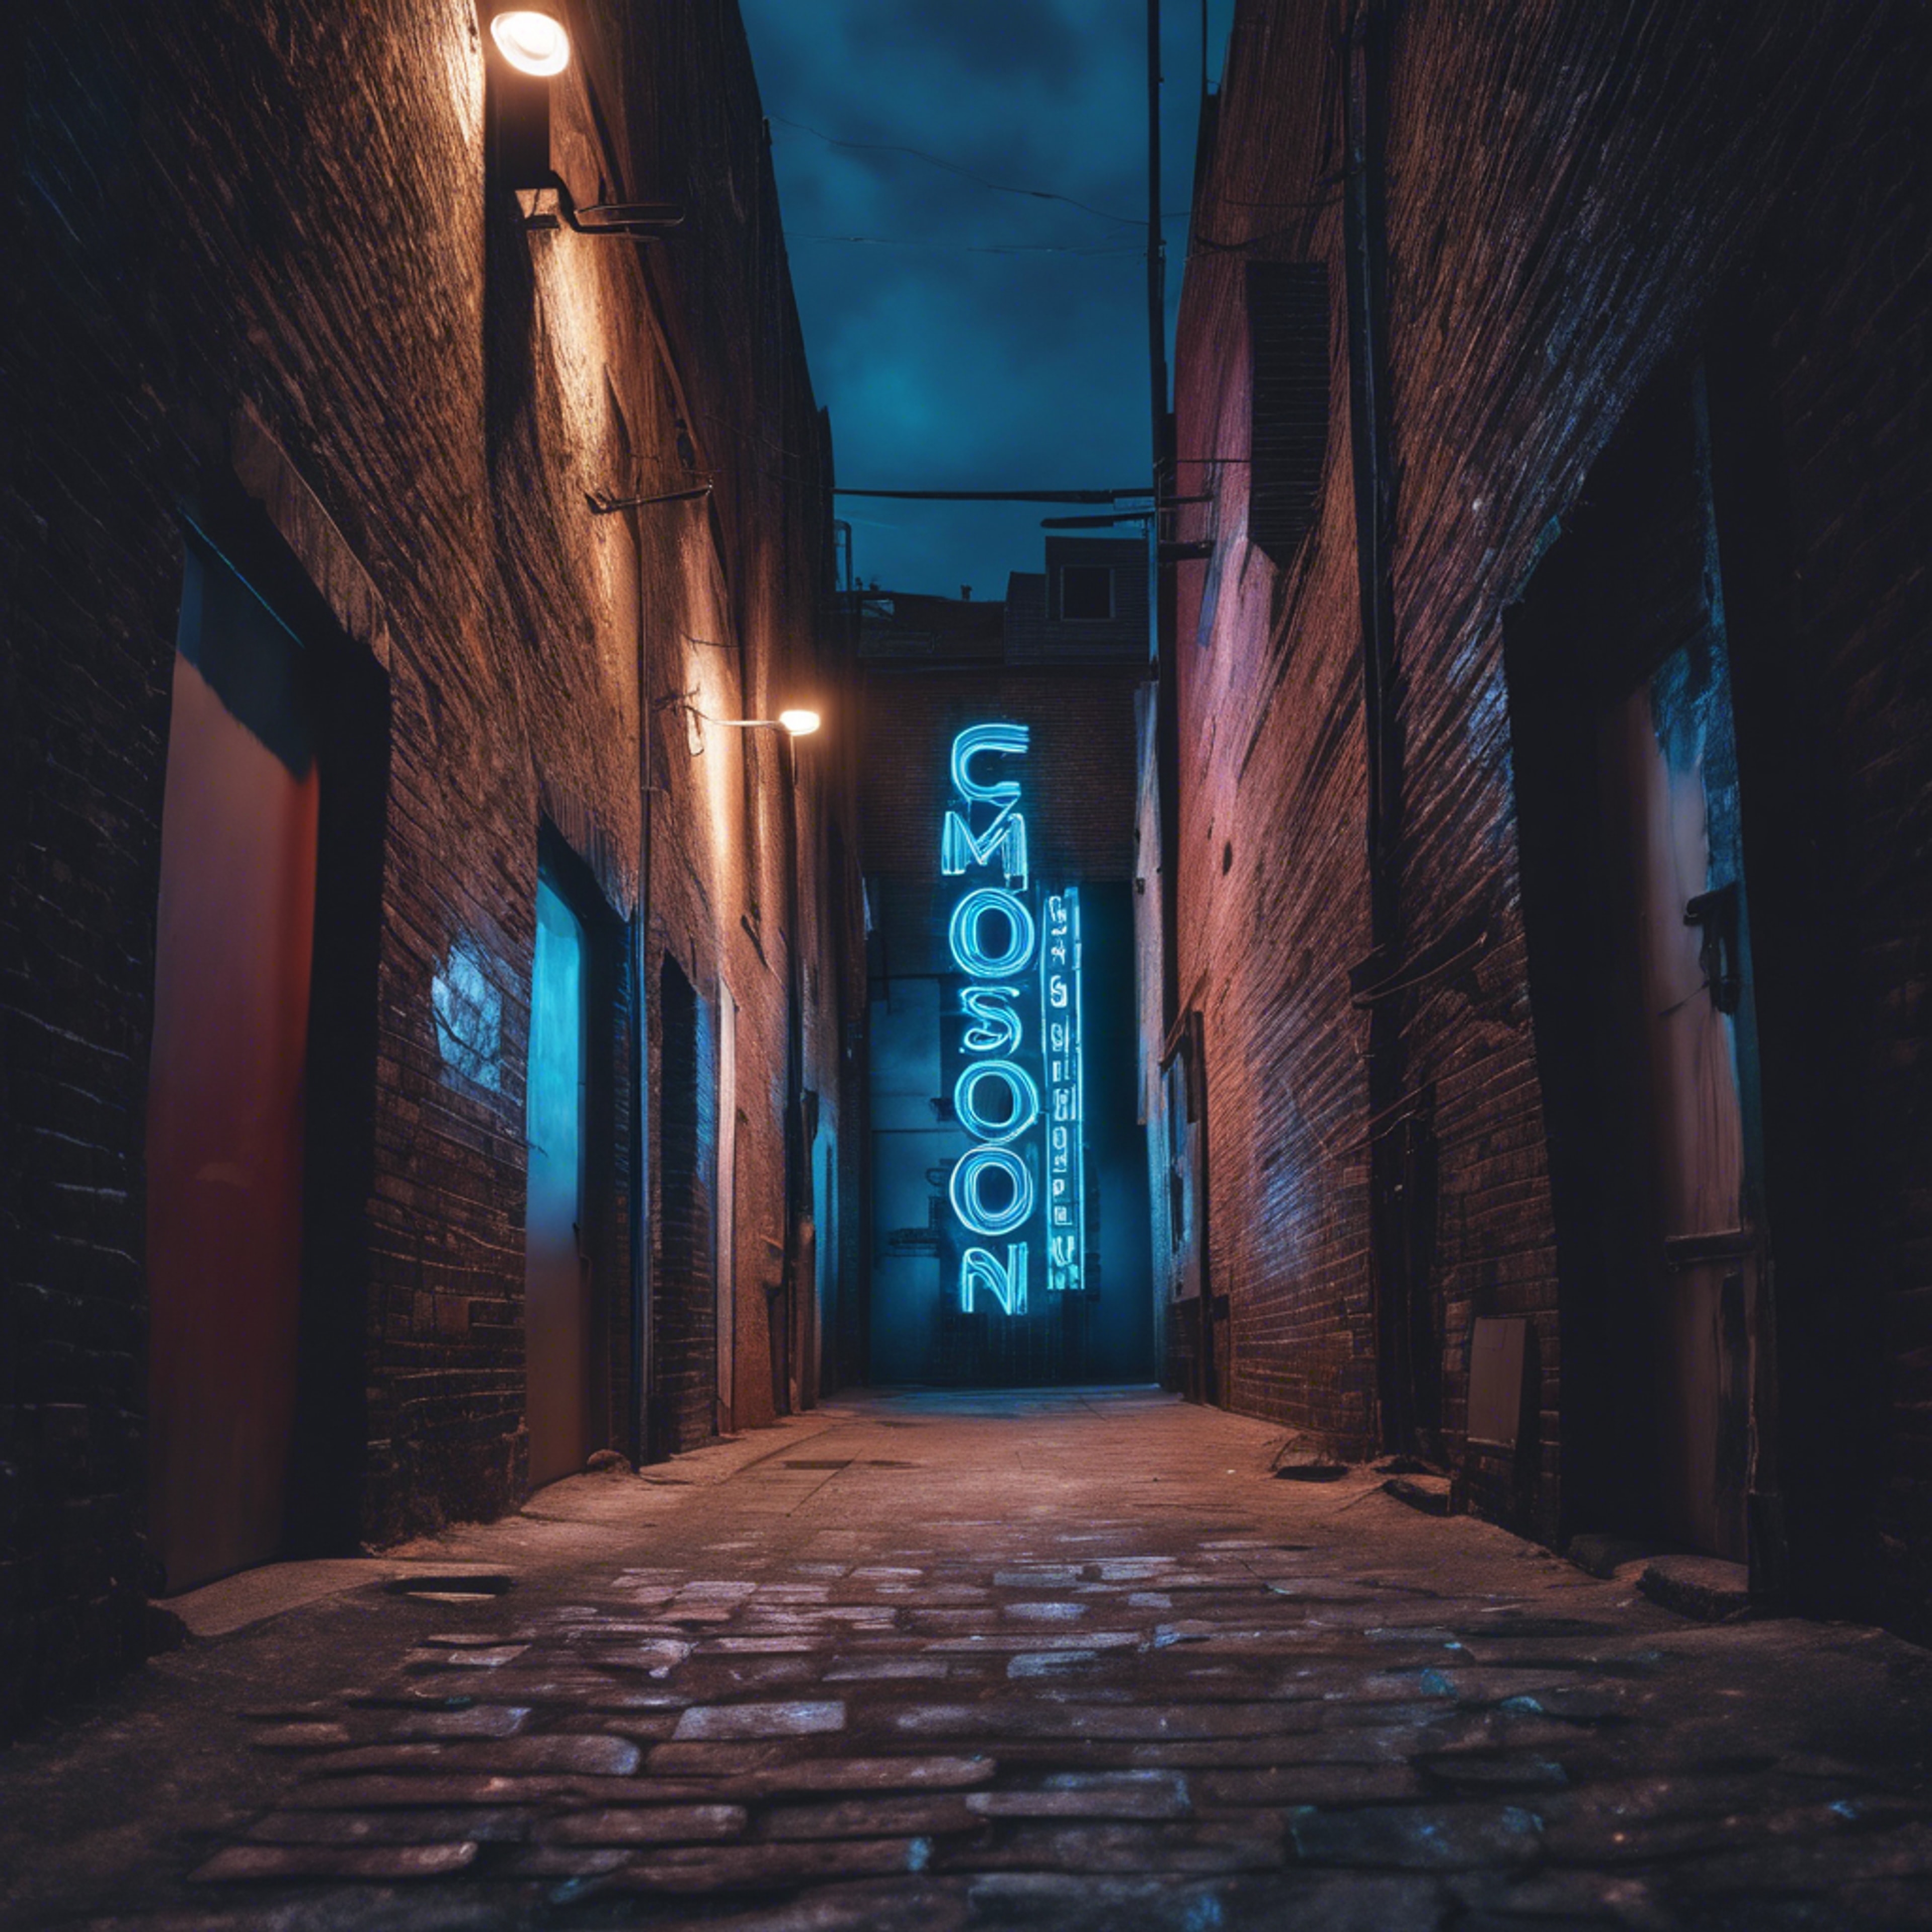 A cool blue neon sign glowing in a dark alley Tapet[2a7b25783bff4a339087]